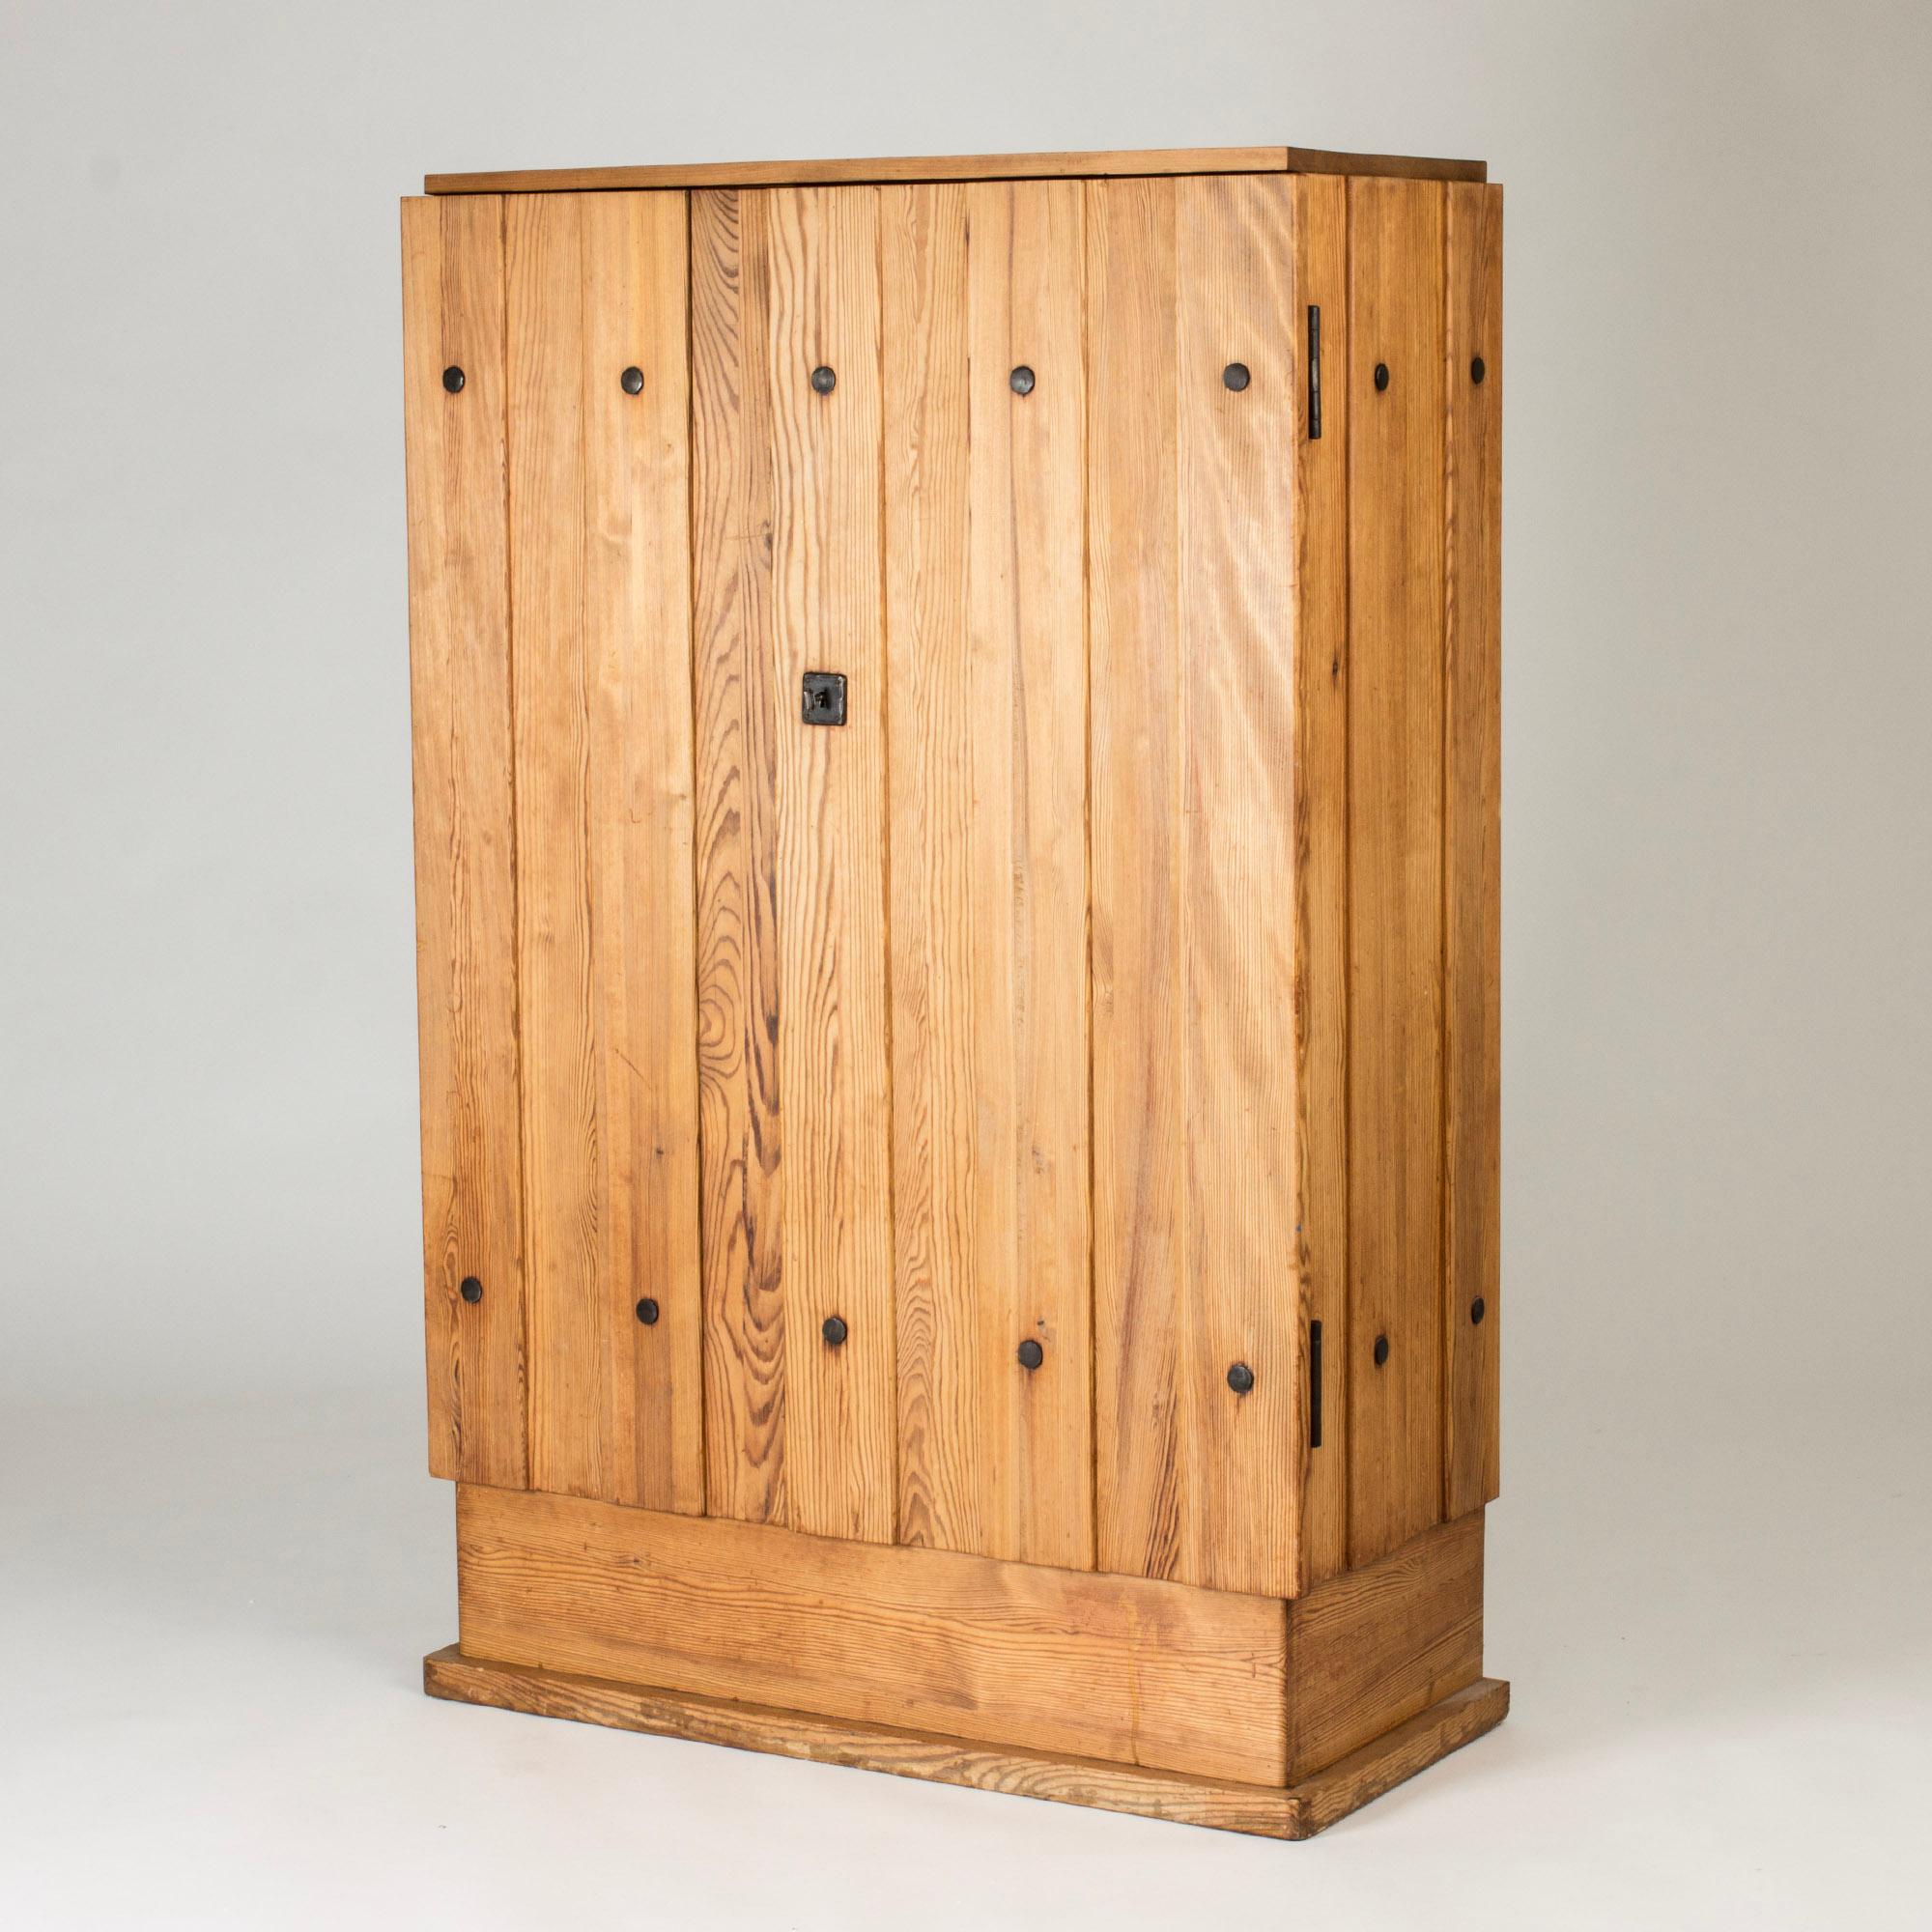 Lovö” cabinet by Axel Einar Hjorth, made from solid pine in a striking, rustic design. Wrought iron details and lock. Practical drawers and shelves inside.